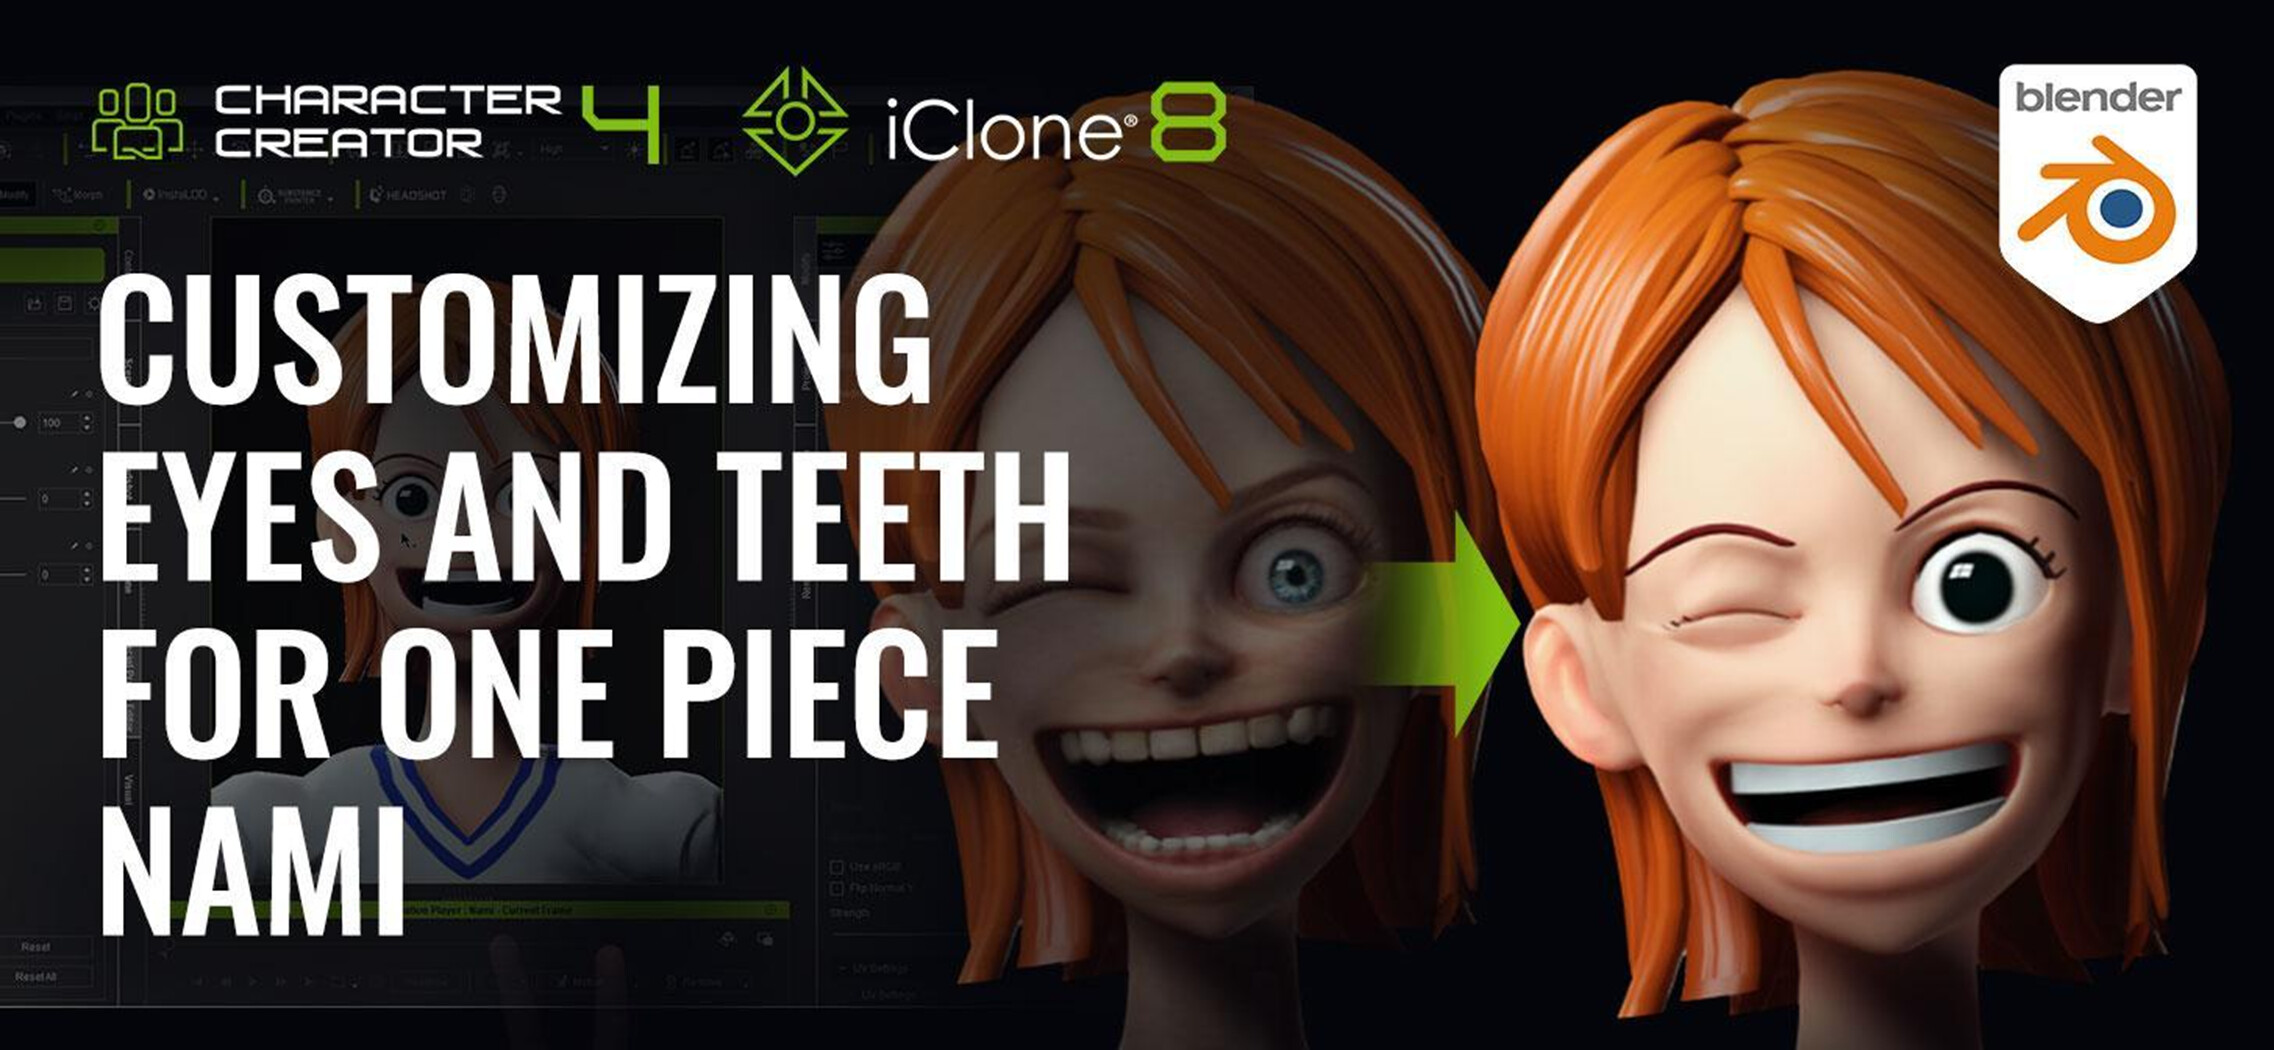 hijack To tell the truth Abroad How to Customize Eyes and Teeth in Character Creator for One Piece Nami -  Tutorials, Tips and Tricks - Blender Artists Community